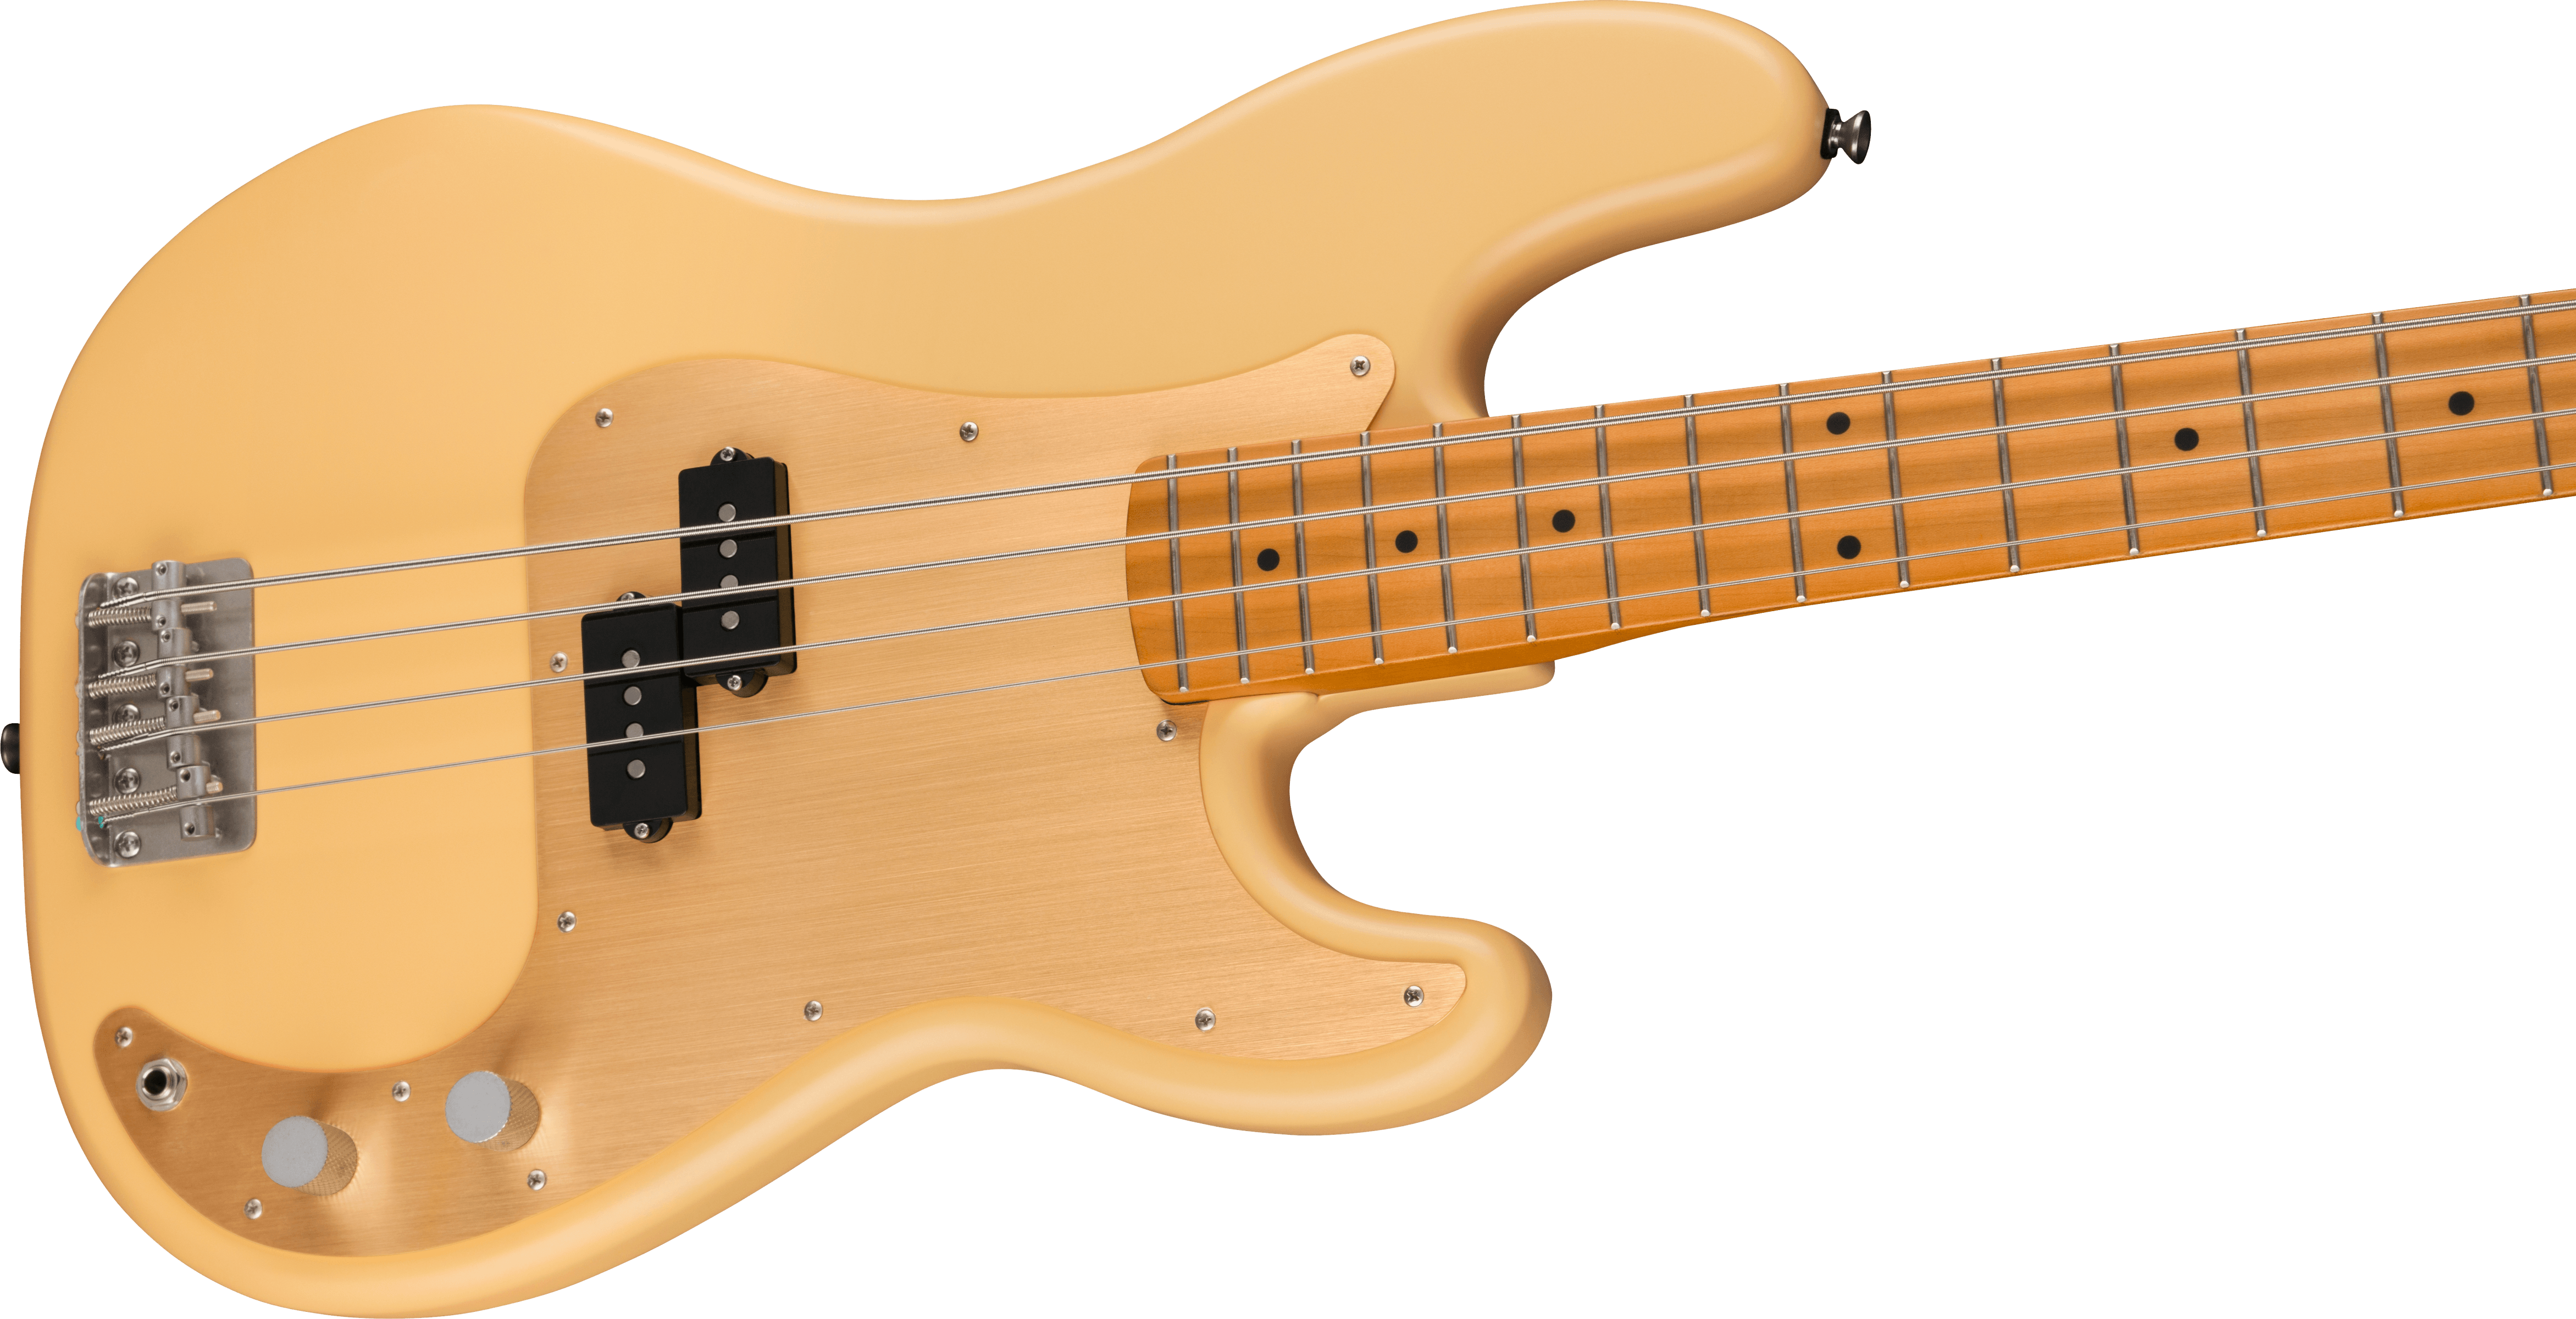 Squier Precision Bass 40th Anniversary Gold Edition Mn - Satin Vintage Blonde - Solid body electric bass - Variation 3